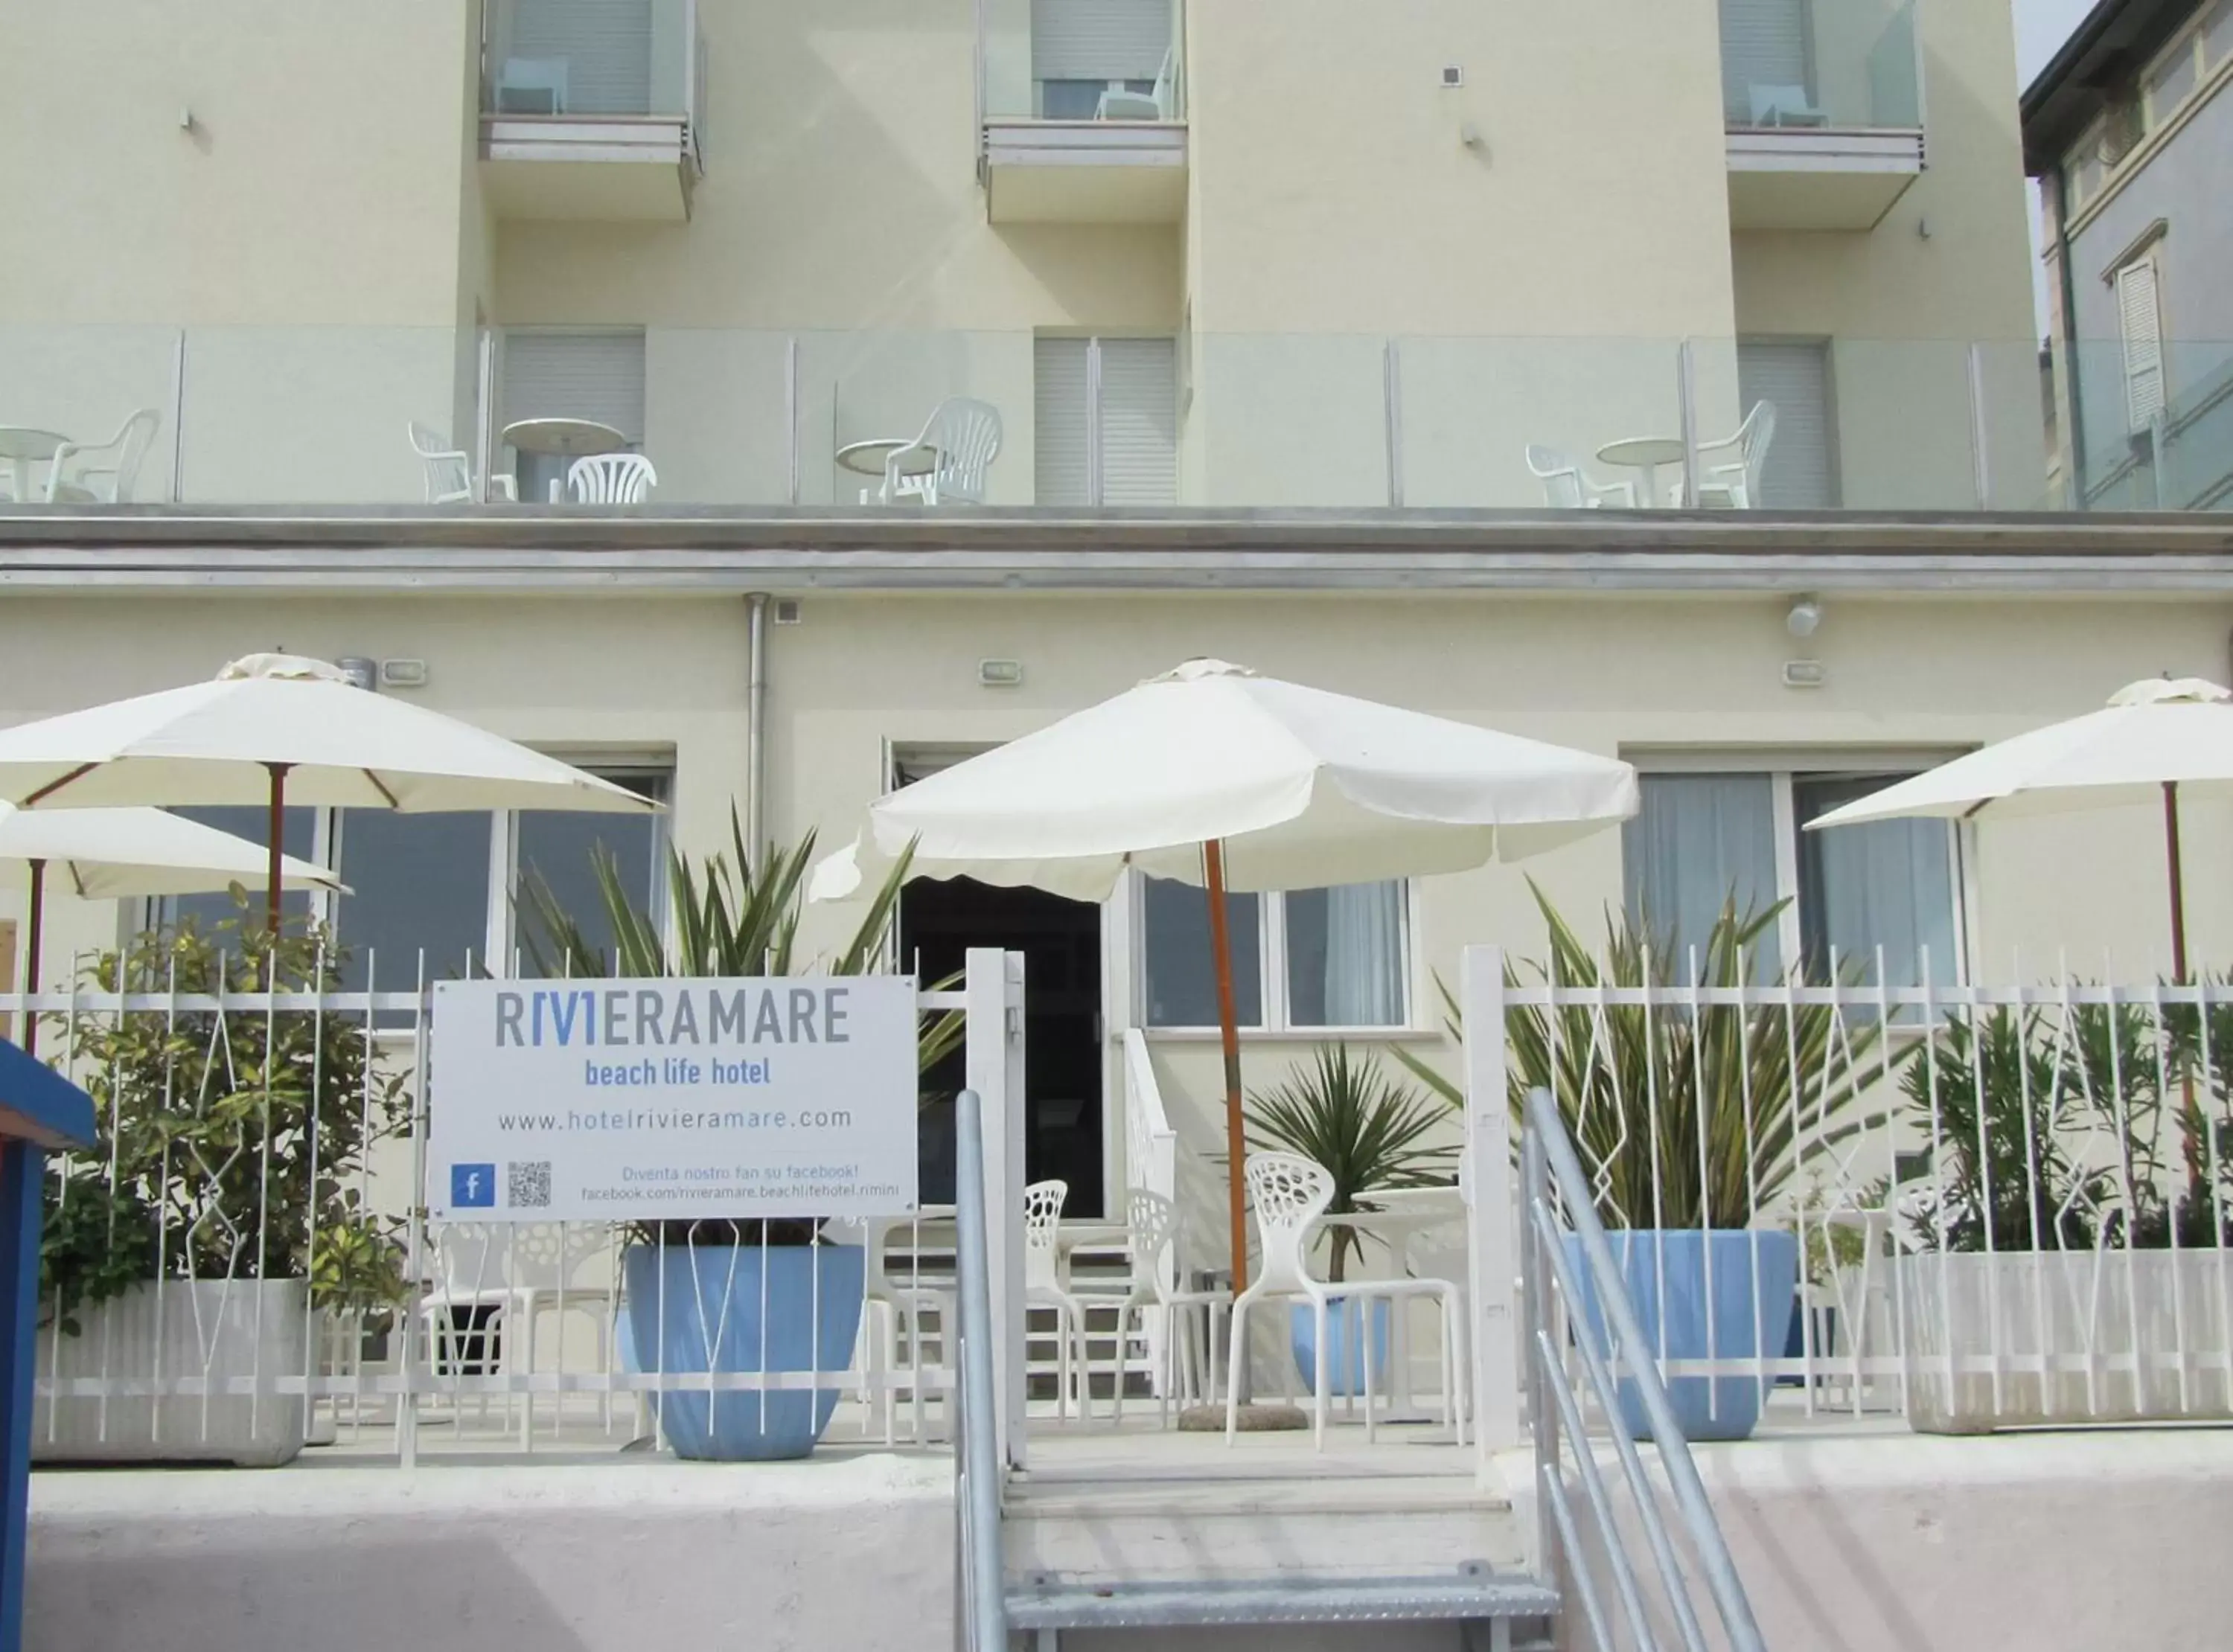 Property building, Swimming Pool in Riviera Mare Beach Life Hotel